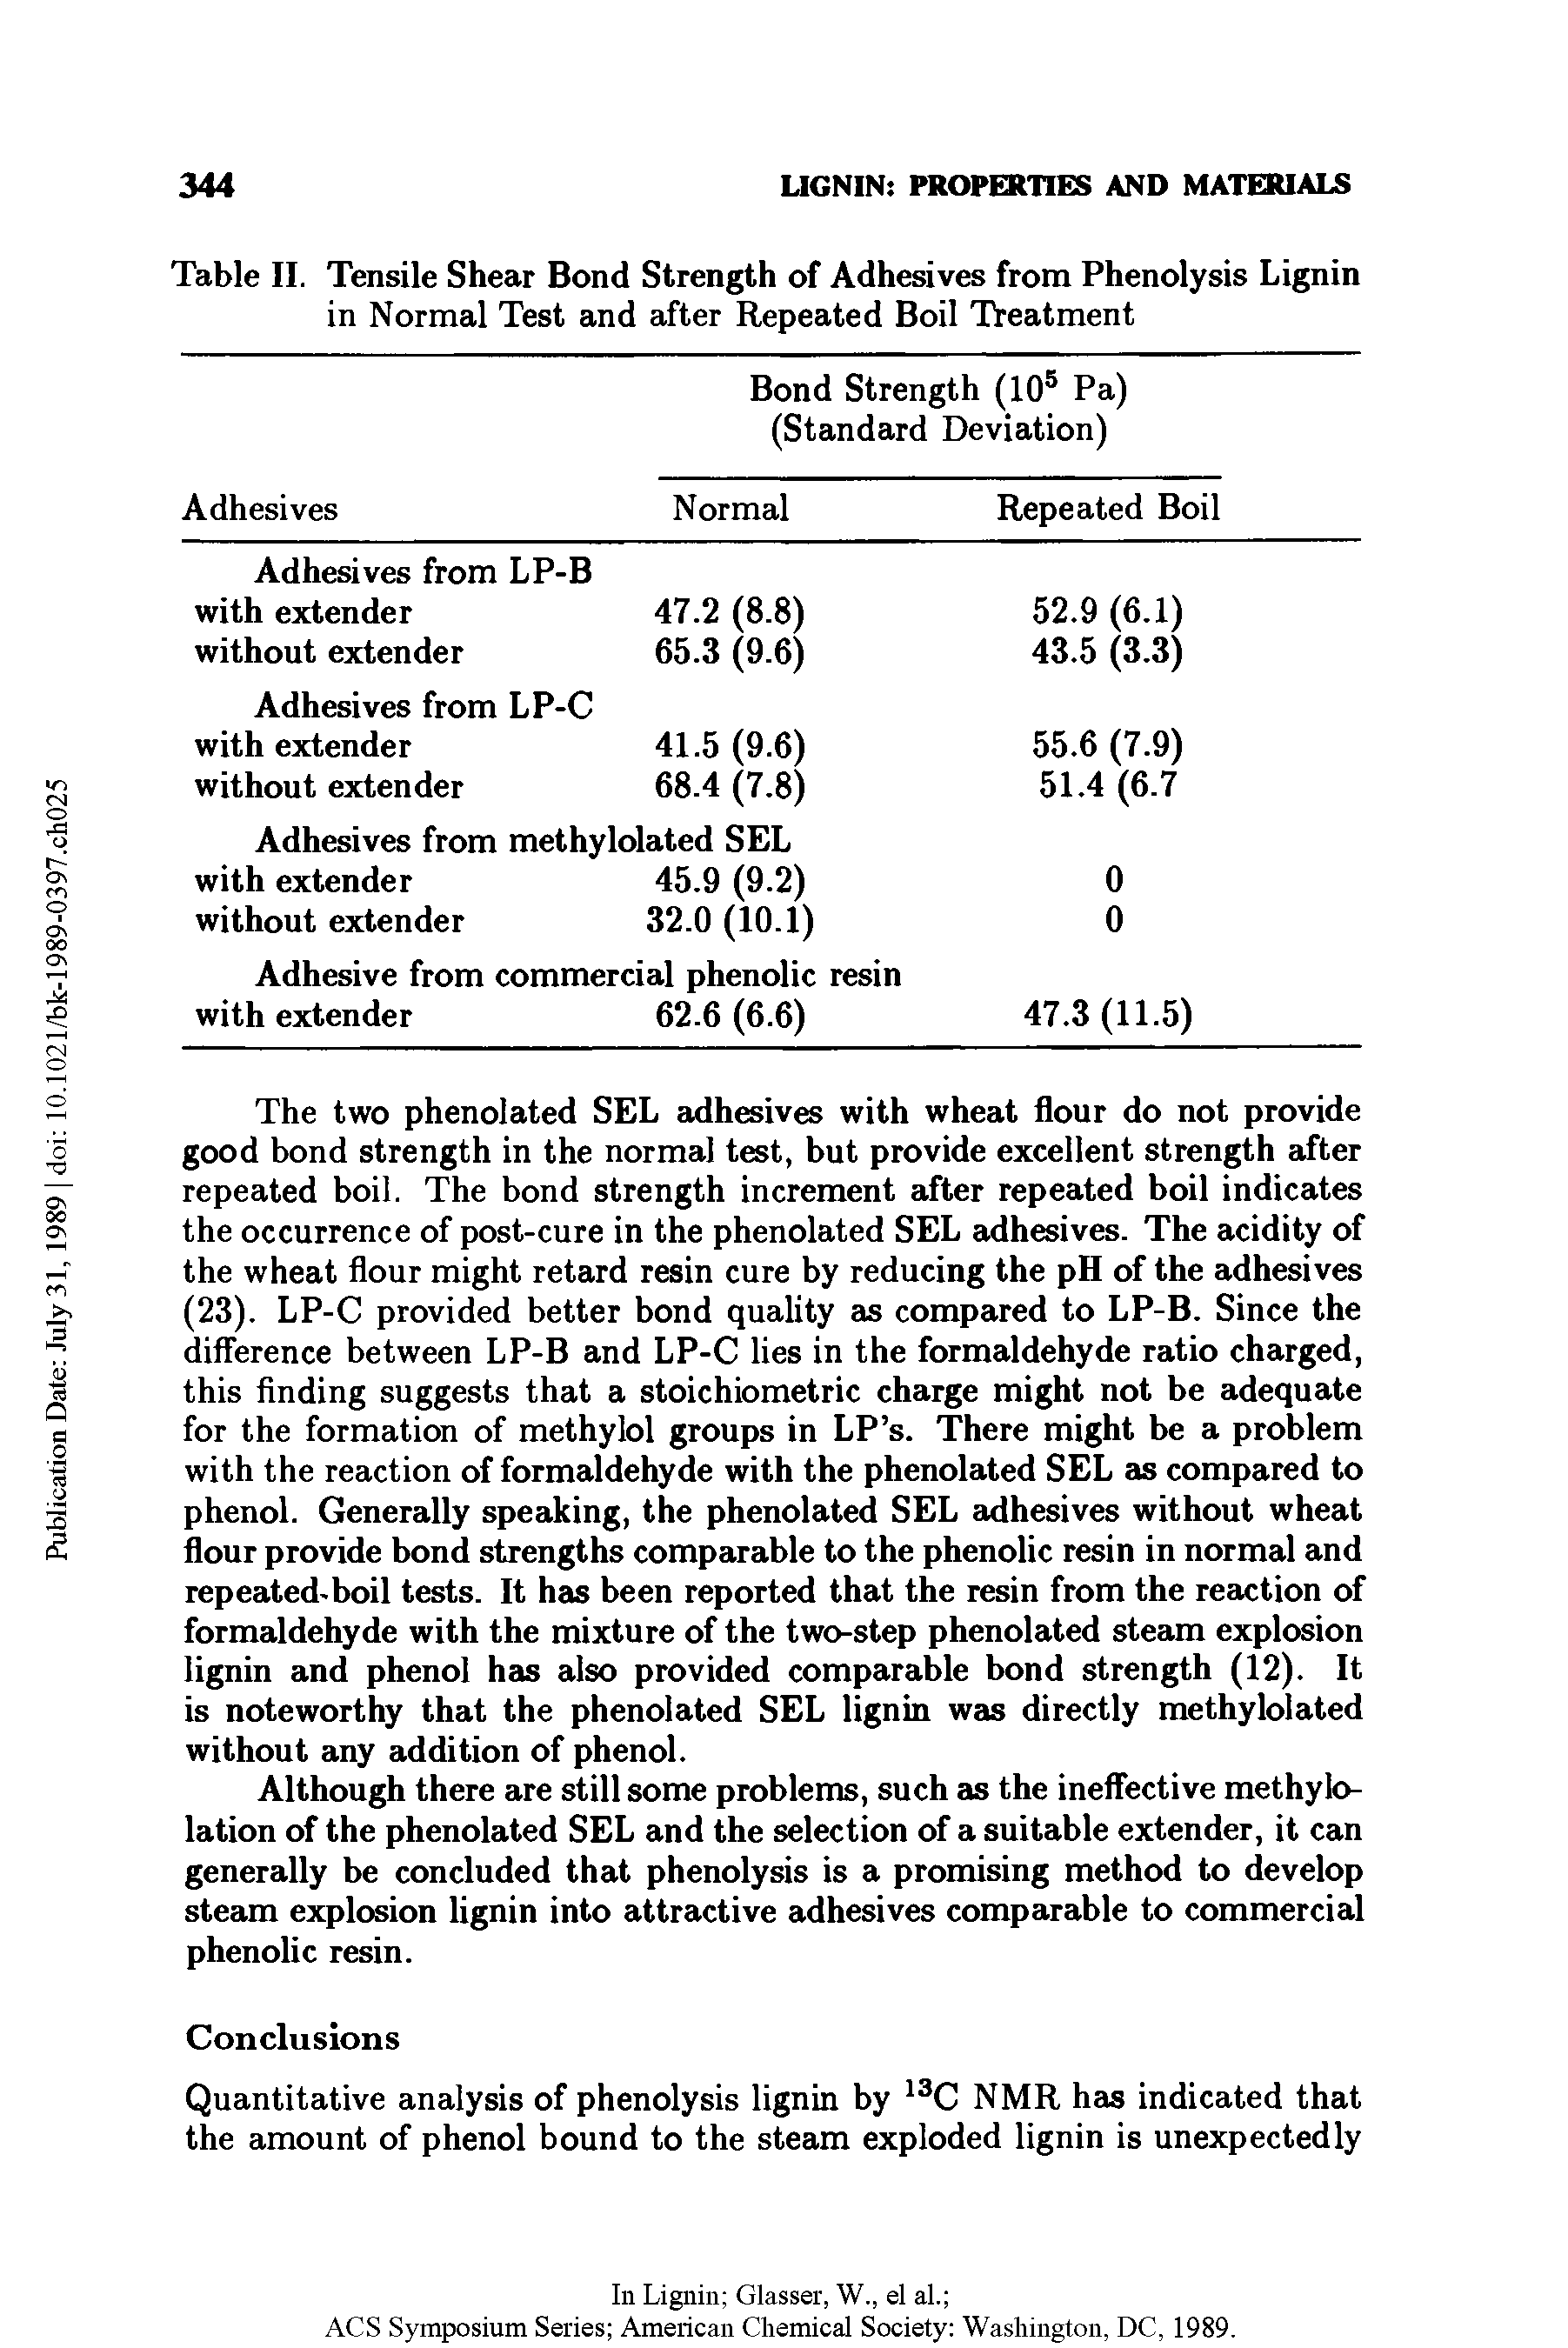 Table II. Tensile Shear Bond Strength of Adhesives from Phenolysis Lignin in Normal Test and after Repeated Boil Treatment...